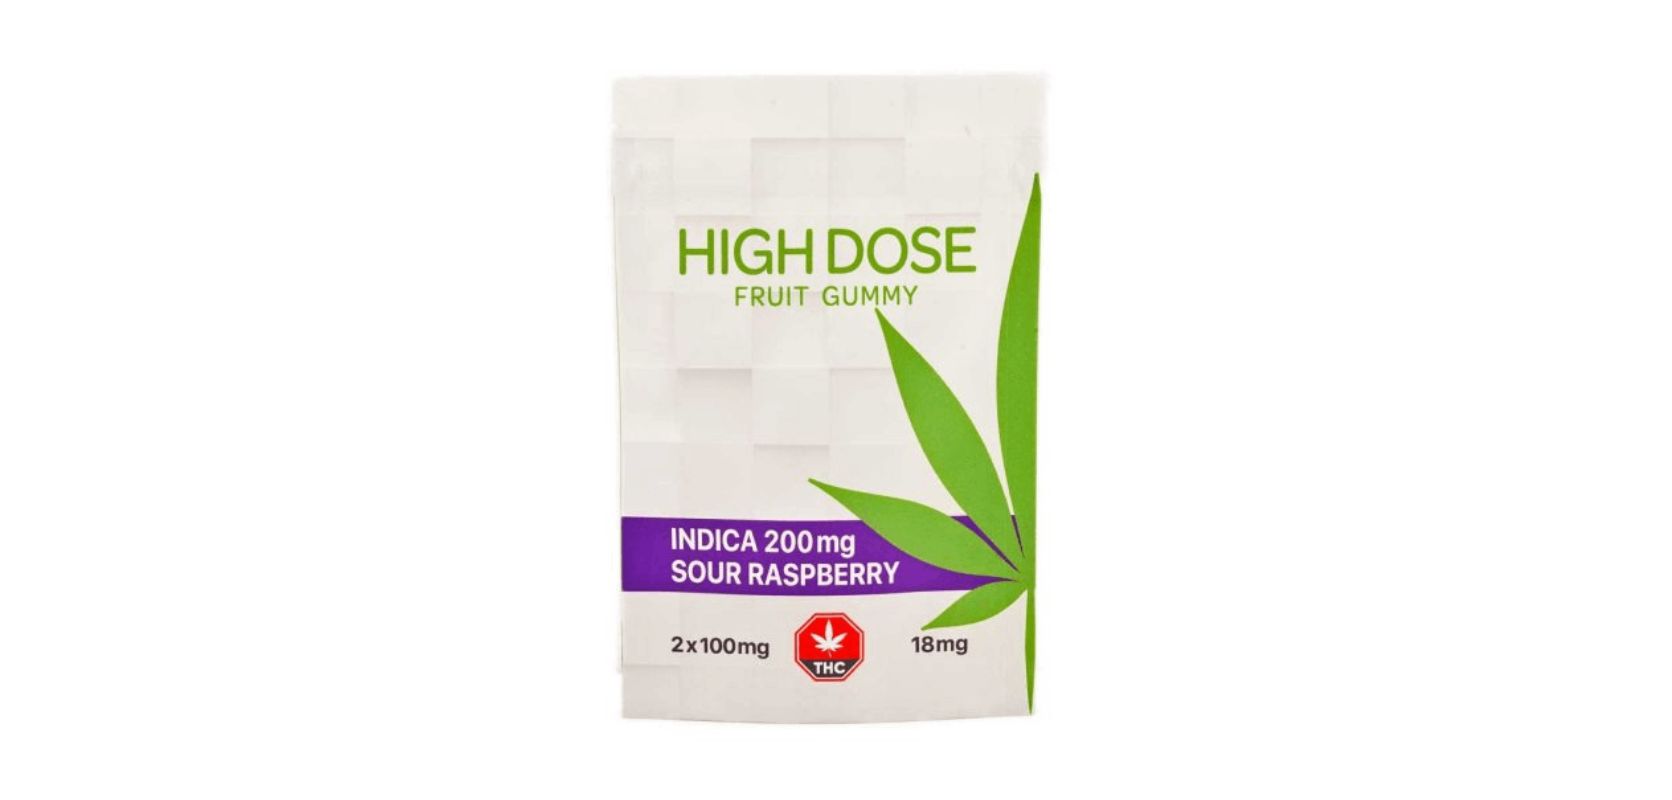 The High Dose Fruit Gummy – Sour Raspberry 200mg THC (Indica) is a superb option for anyone who enjoys natural and sweet flavours. 